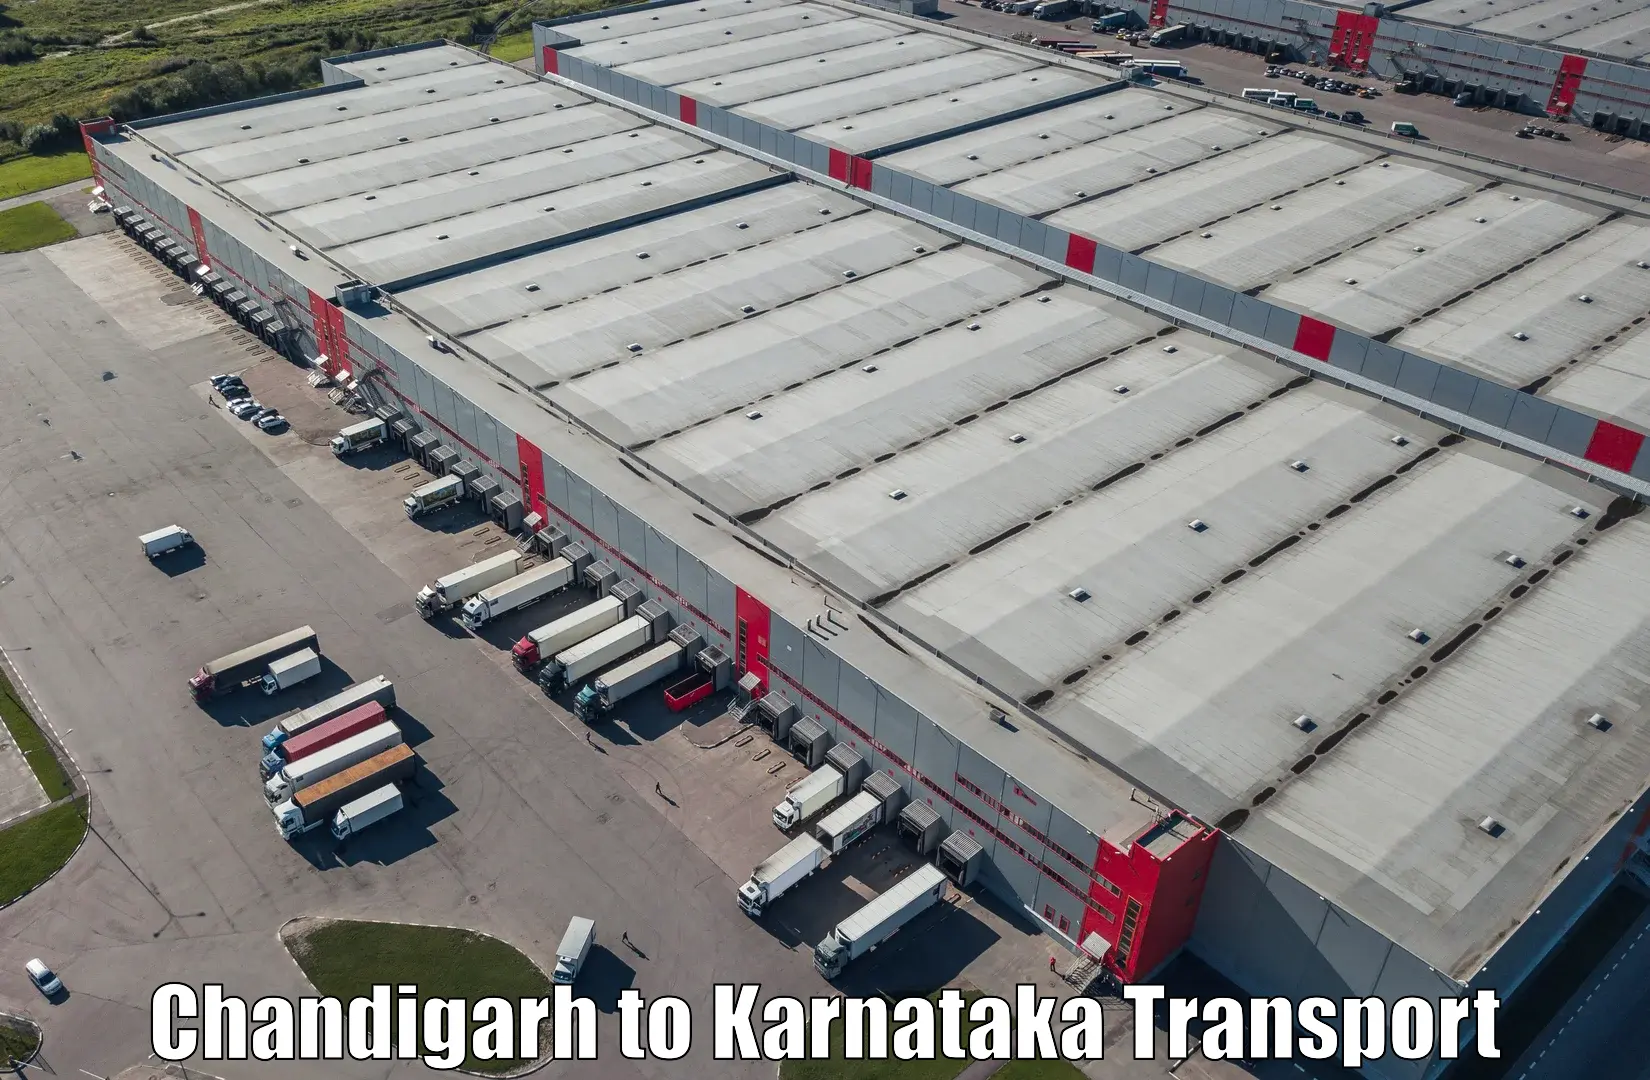 Commercial transport service Chandigarh to Mandya